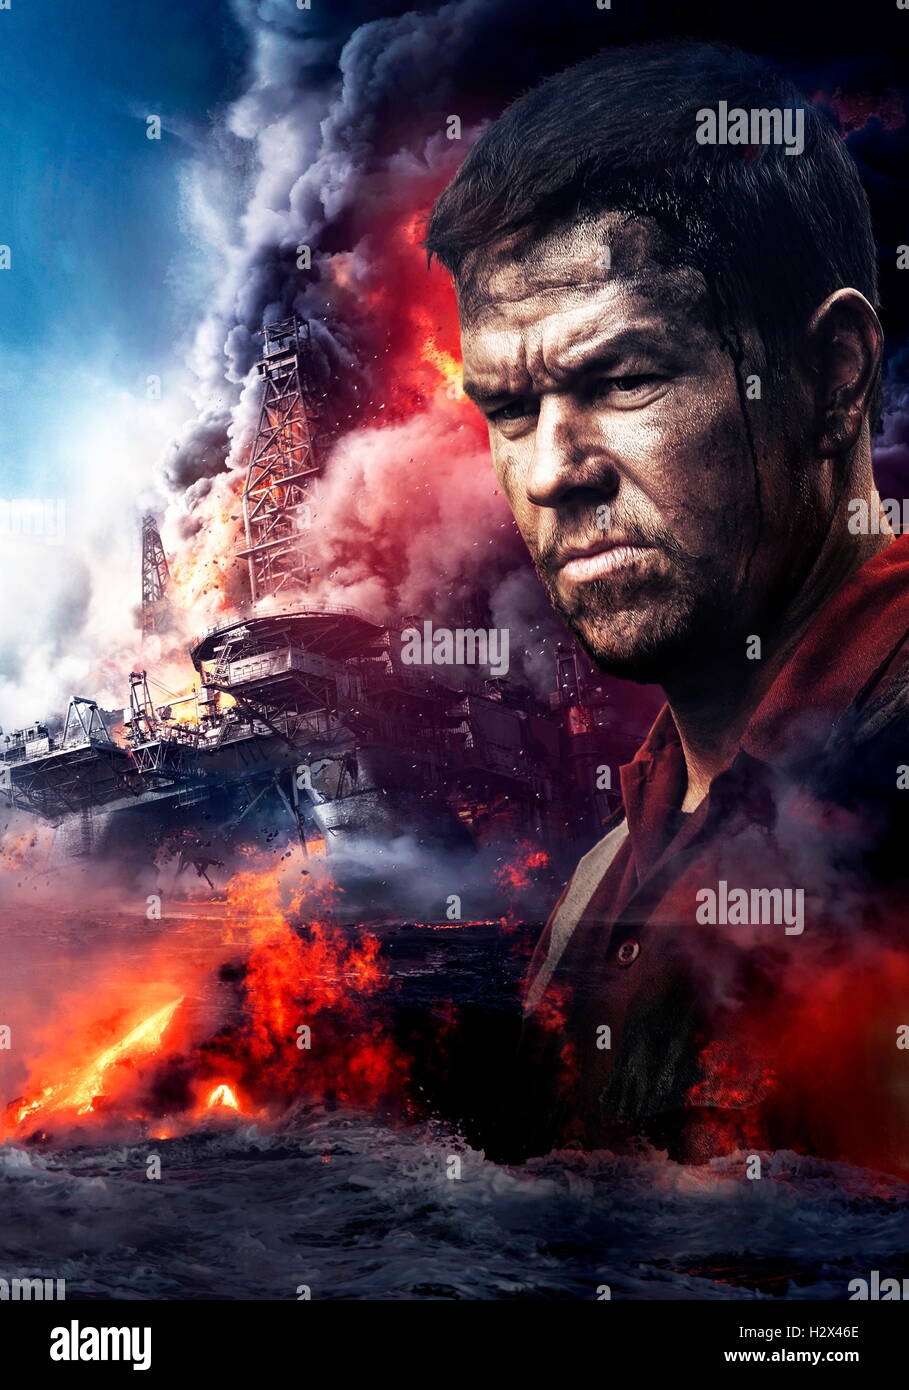 RELEASE DATE: September 30, 2016 TITLE: Deepwater Horizon STUDIO: Lionsgate DIRECTOR: Peter Berg PLOT: A story set on the offshore drilling rig Deepwater Horizon, which exploded during April 2010 and created the worst oil spill in U.S. history PICTURED: Poster art (Credit Image: c Lionsgate/Entertainment Pictures/) Stock Photo